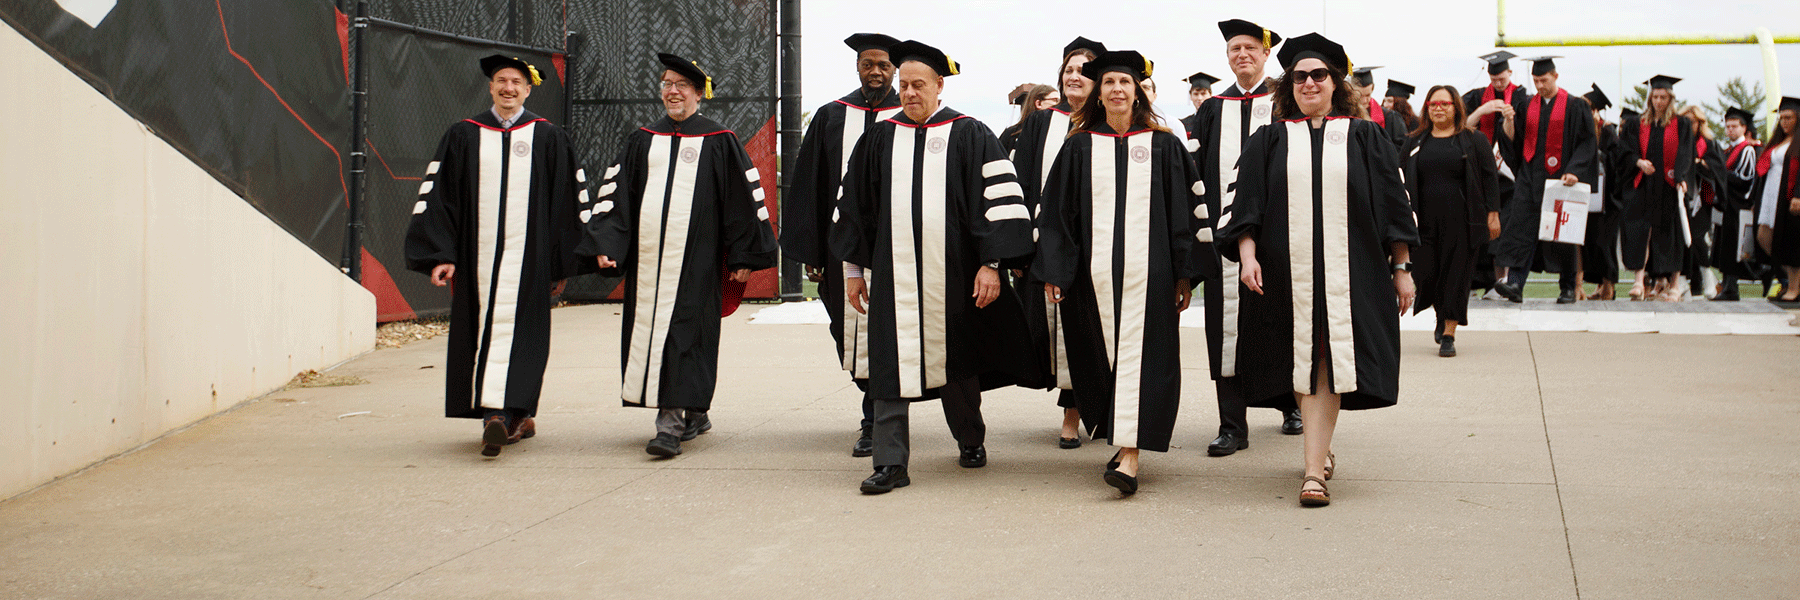 Faculty members walk into Commencement.